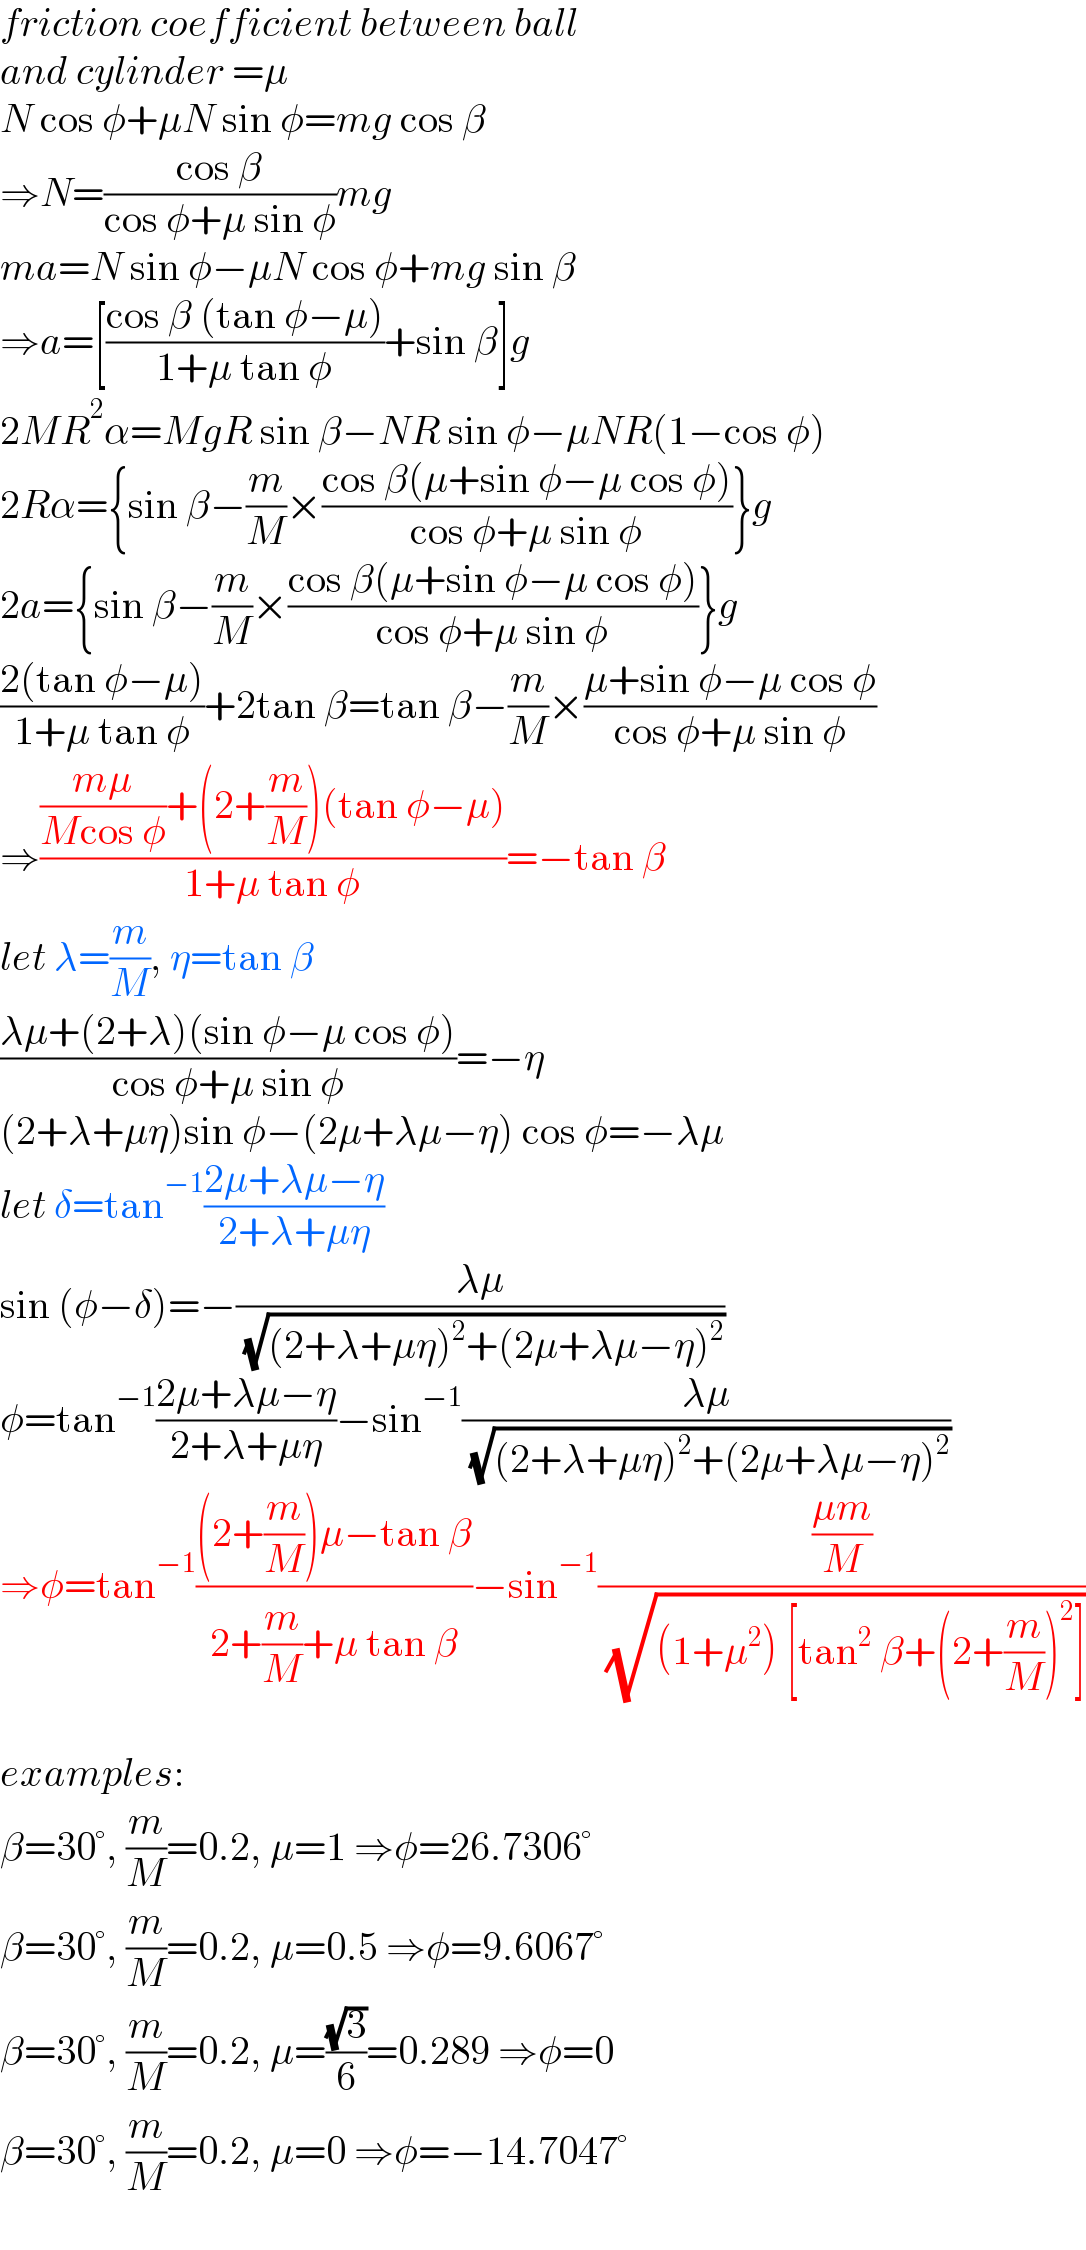 friction coefficient between ball  and cylinder =μ  N cos φ+μN sin φ=mg cos β  ⇒N=((cos β)/(cos φ+μ sin φ))mg  ma=N sin φ−μN cos φ+mg sin β  ⇒a=[((cos β (tan φ−μ))/(1+μ tan φ))+sin β]g  2MR^2 α=MgR sin β−NR sin φ−μNR(1−cos φ)  2Rα={sin β−(m/M)×((cos β(μ+sin φ−μ cos φ))/(cos φ+μ sin φ))}g  2a={sin β−(m/M)×((cos β(μ+sin φ−μ cos φ))/(cos φ+μ sin φ))}g  ((2(tan φ−μ))/(1+μ tan φ))+2tan β=tan β−(m/M)×((μ+sin φ−μ cos φ)/(cos φ+μ sin φ))  ⇒((((mμ)/(Mcos φ))+(2+(m/M))(tan φ−μ))/(1+μ tan φ))=−tan β  let λ=(m/M), η=tan β  ((λμ+(2+λ)(sin φ−μ cos φ))/(cos φ+μ sin φ))=−η  (2+λ+μη)sin φ−(2μ+λμ−η) cos φ=−λμ  let δ=tan^(−1) ((2μ+λμ−η)/(2+λ+μη))  sin (φ−δ)=−((λμ)/( (√((2+λ+μη)^2 +(2μ+λμ−η)^2 ))))  φ=tan^(−1) ((2μ+λμ−η)/(2+λ+μη))−sin^(−1) ((λμ)/( (√((2+λ+μη)^2 +(2μ+λμ−η)^2 ))))  ⇒φ=tan^(−1) (((2+(m/M))μ−tan β)/(2+(m/M)+μ tan β))−sin^(−1) (((μm)/M)/( (√((1+μ^2 ) [tan^2  β+(2+(m/M))^2 ]))))    examples:  β=30°, (m/M)=0.2, μ=1 ⇒φ=26.7306°  β=30°, (m/M)=0.2, μ=0.5 ⇒φ=9.6067°  β=30°, (m/M)=0.2, μ=((√3)/6)=0.289 ⇒φ=0  β=30°, (m/M)=0.2, μ=0 ⇒φ=−14.7047°  